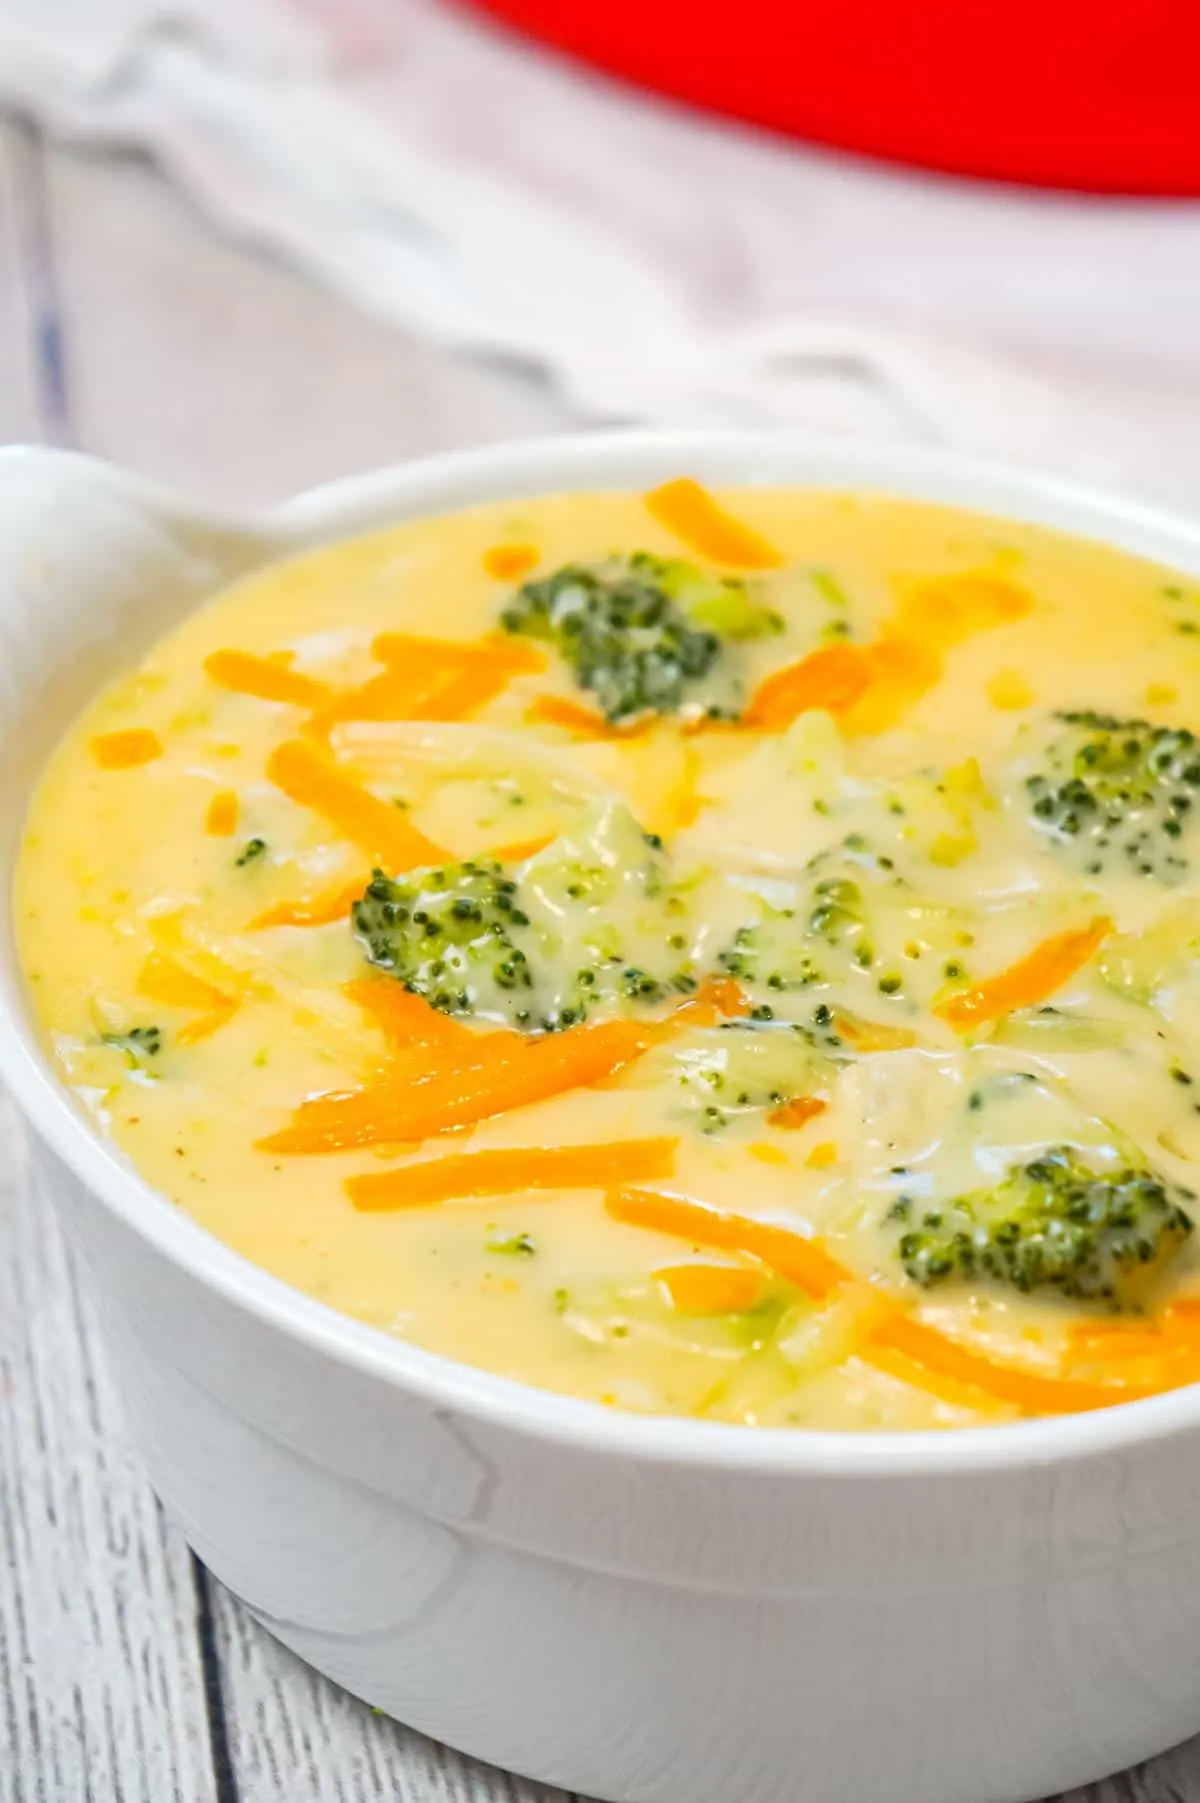 Broccoli Cheddar Soup is a thick and creamy soup recipe loaded with broccoli florets and cheddar cheese.